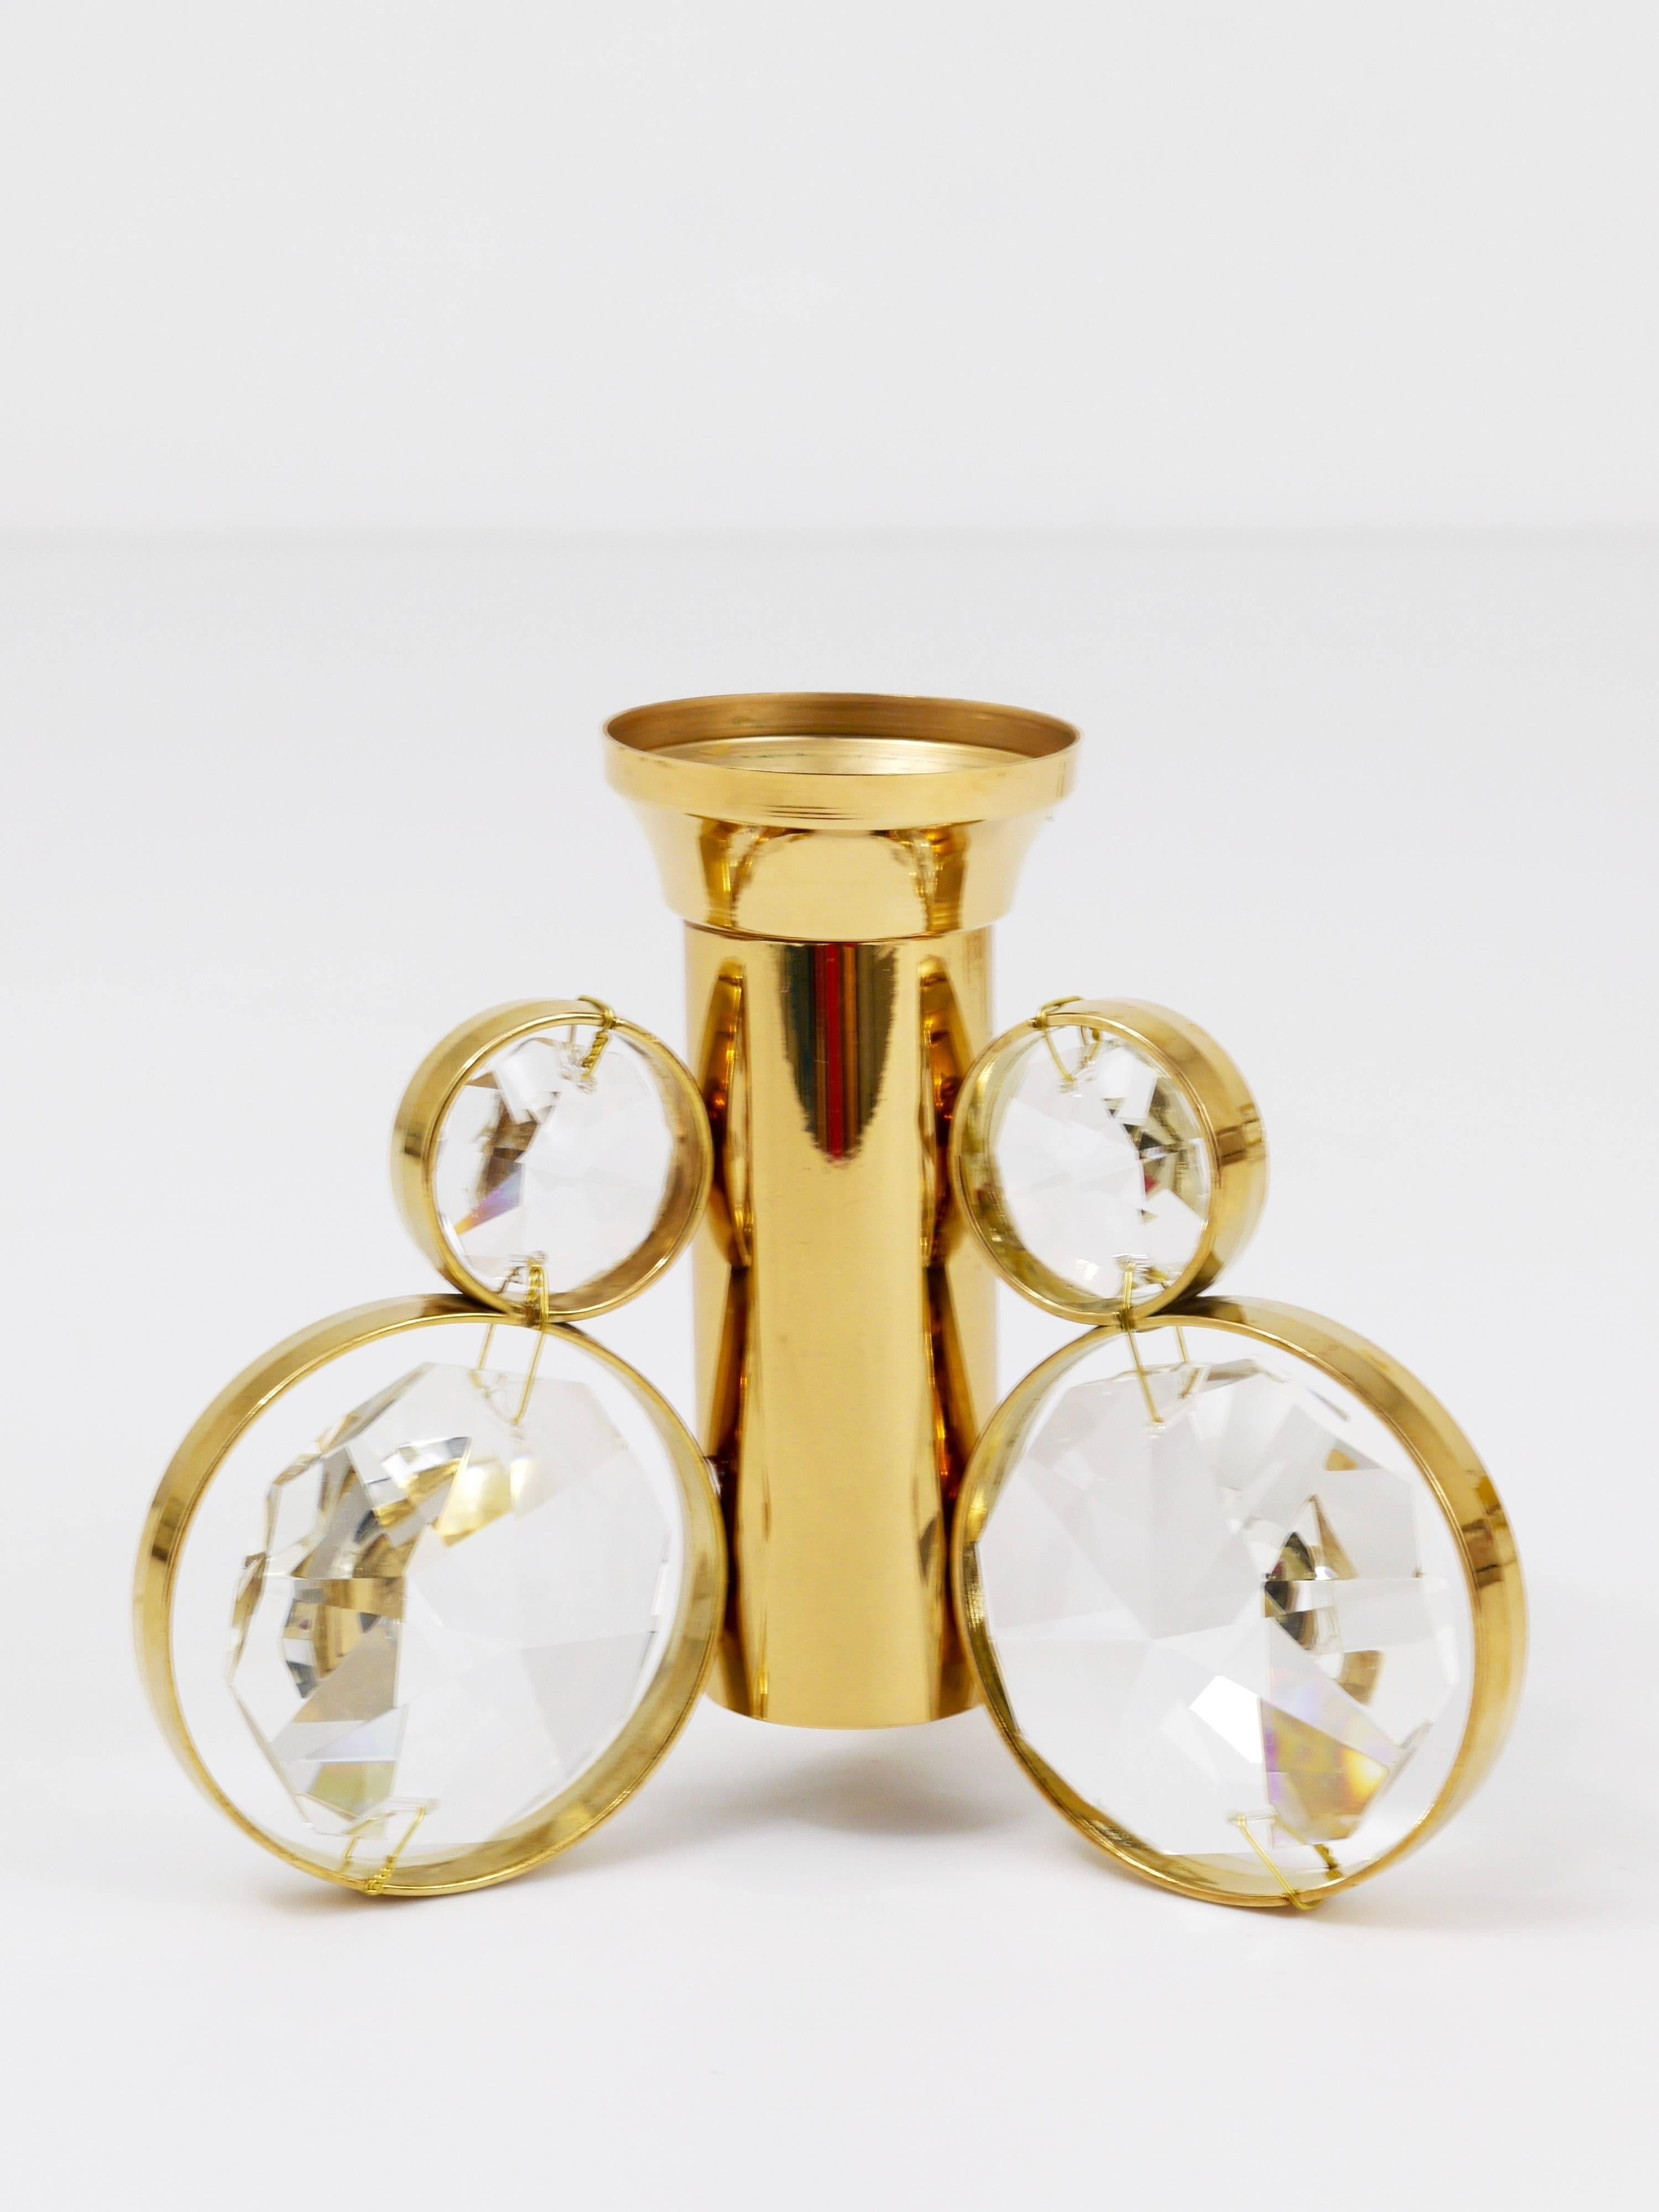 Up to 10 beautiful candle holders in the style of Gaetano Sciolari. Manufactured in the 1970s by Palwa Germany. Made of gold-plated brass with huge faceted crystals. In excellent condition. There are ten identical candleholders available, the price